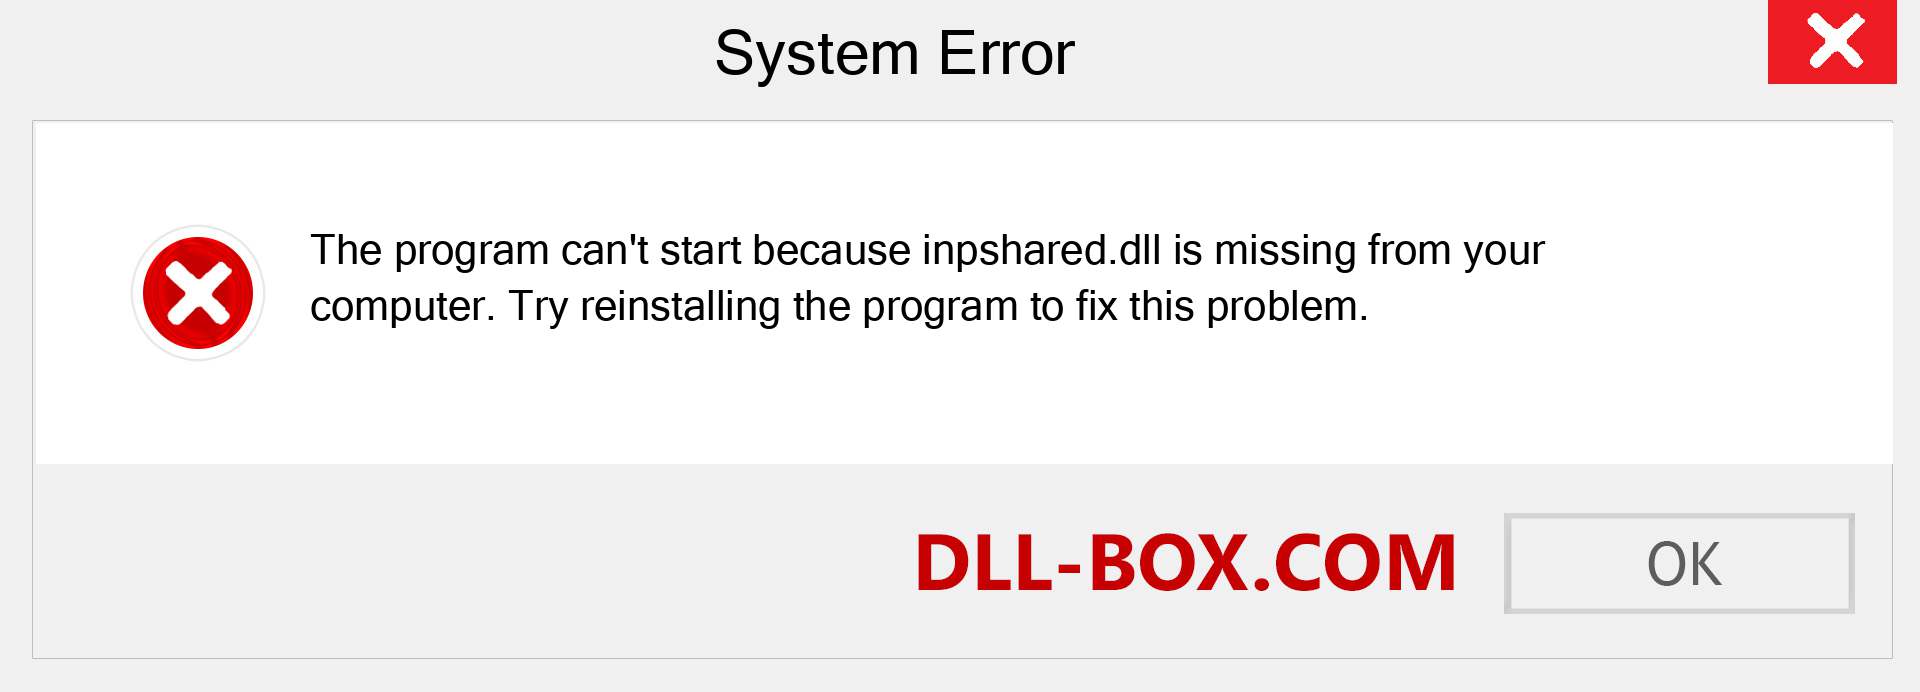  inpshared.dll file is missing?. Download for Windows 7, 8, 10 - Fix  inpshared dll Missing Error on Windows, photos, images